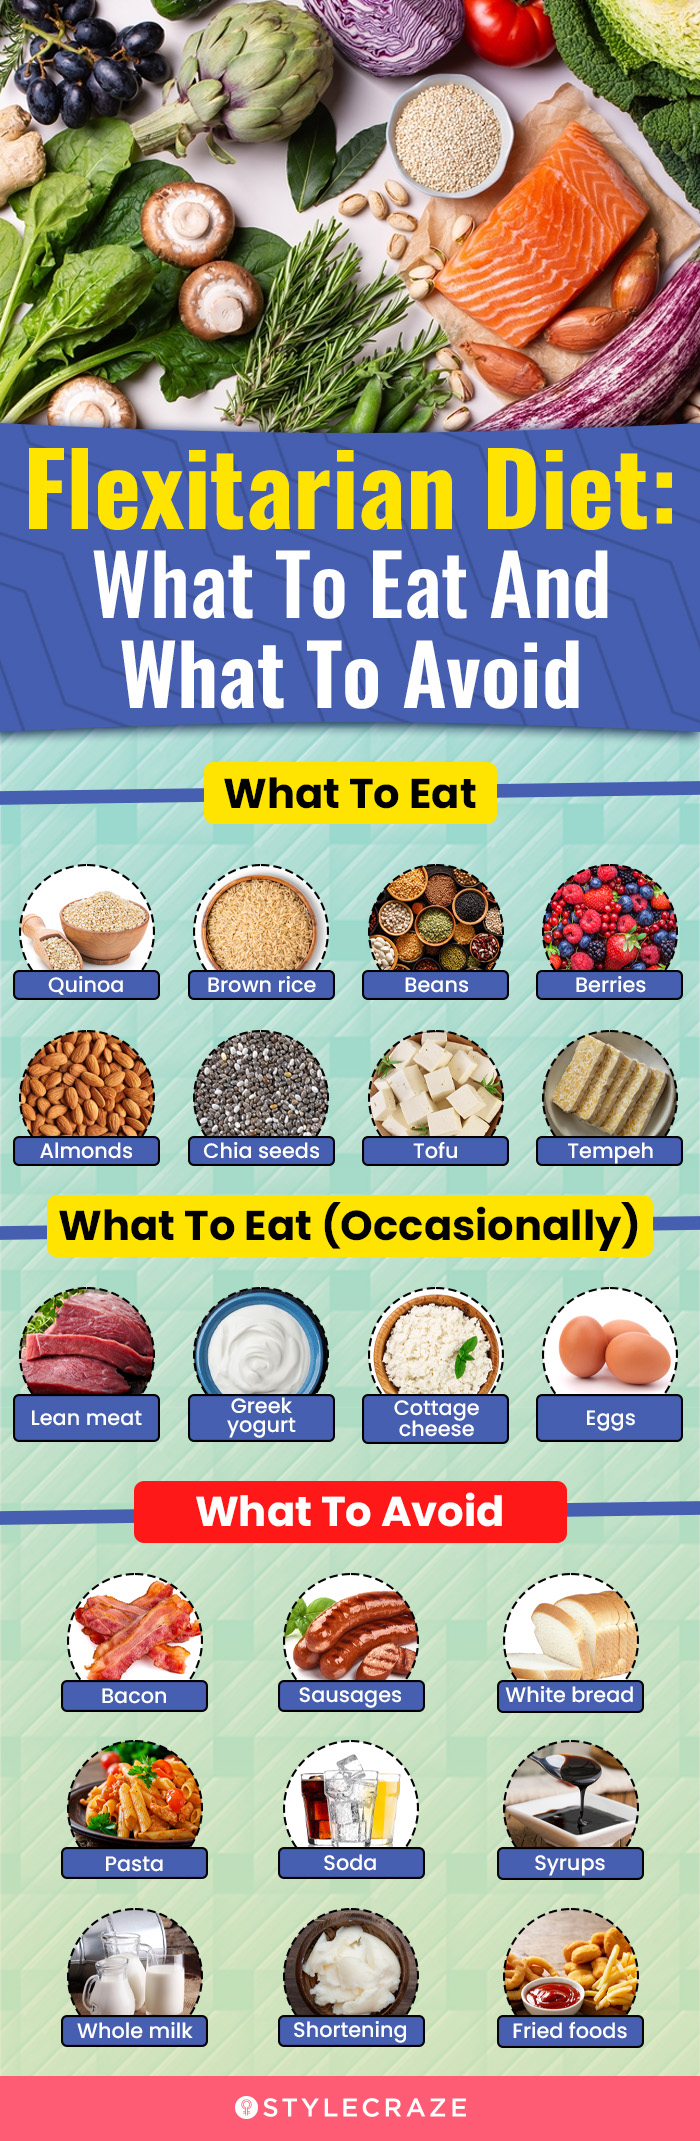 flexitarian diet what to eat and what to avoid (infographic)